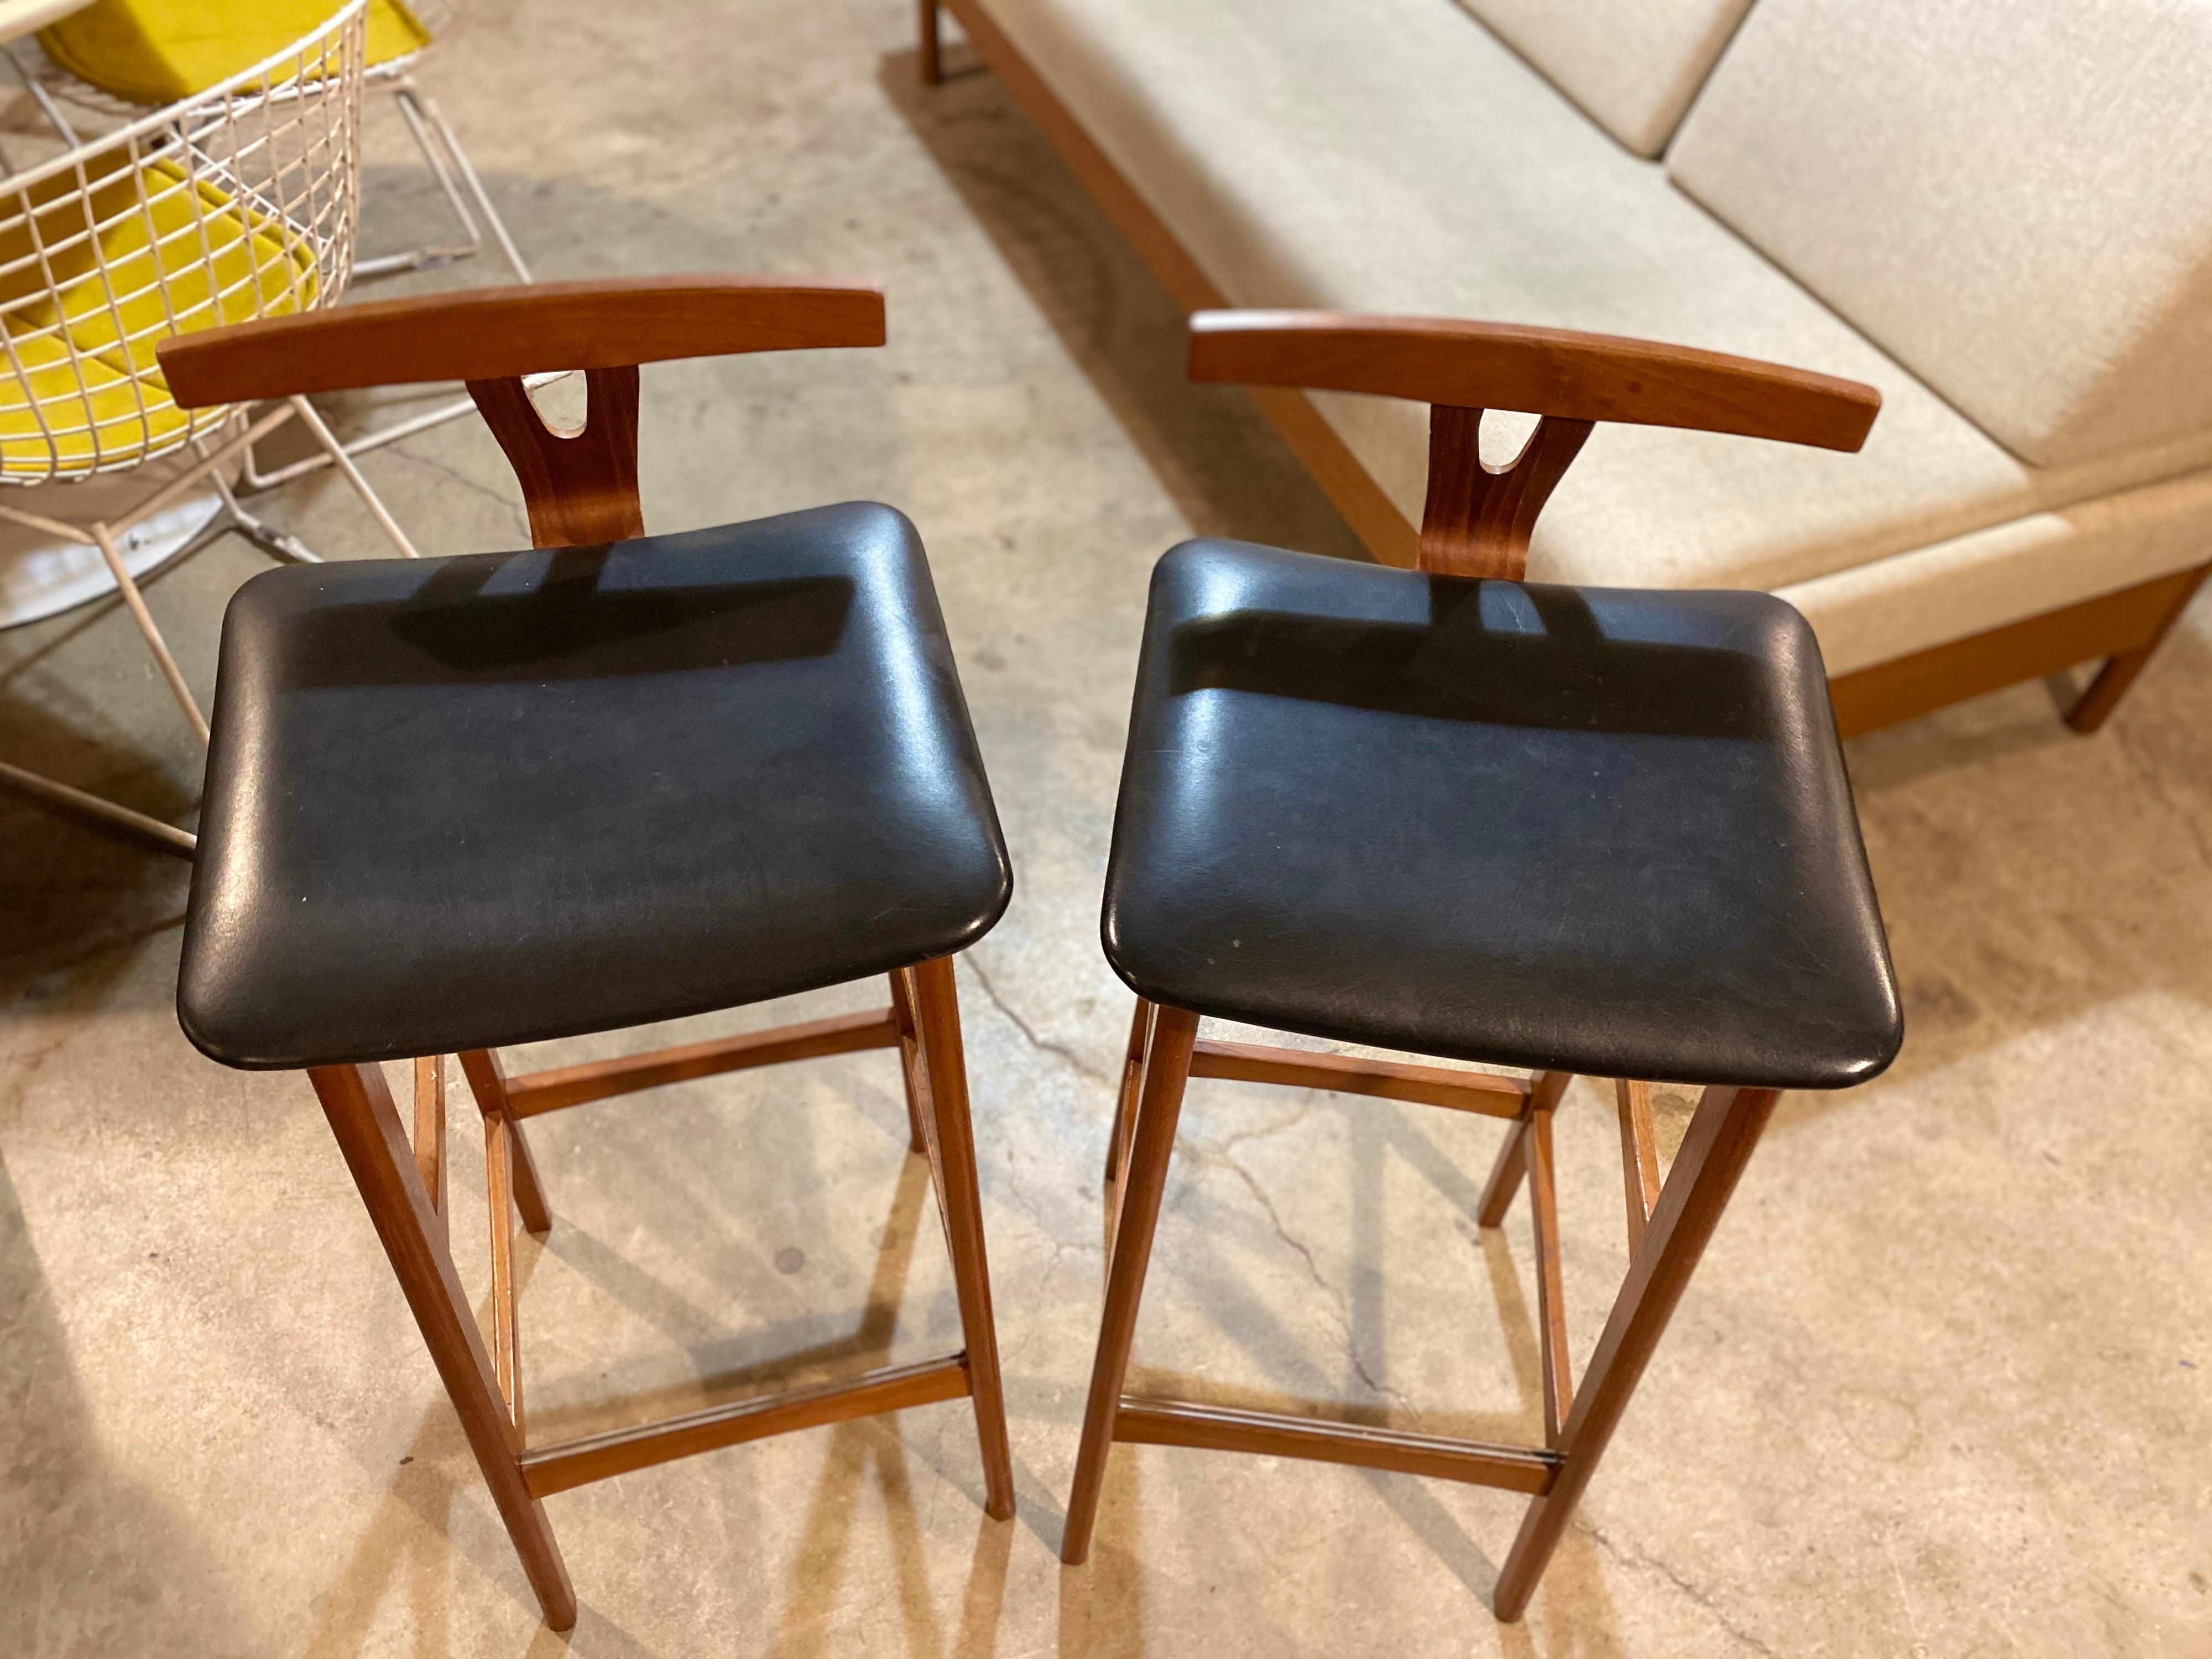 Pair of distinctive Danish barstools by Erik Buch for Dyrlund, Denmark circa 1960s. Barstools are made of teak, have a low t-back with leather seats, and are in great vintage condition. This pair of Classic Scandinavian Modern barstools are unique